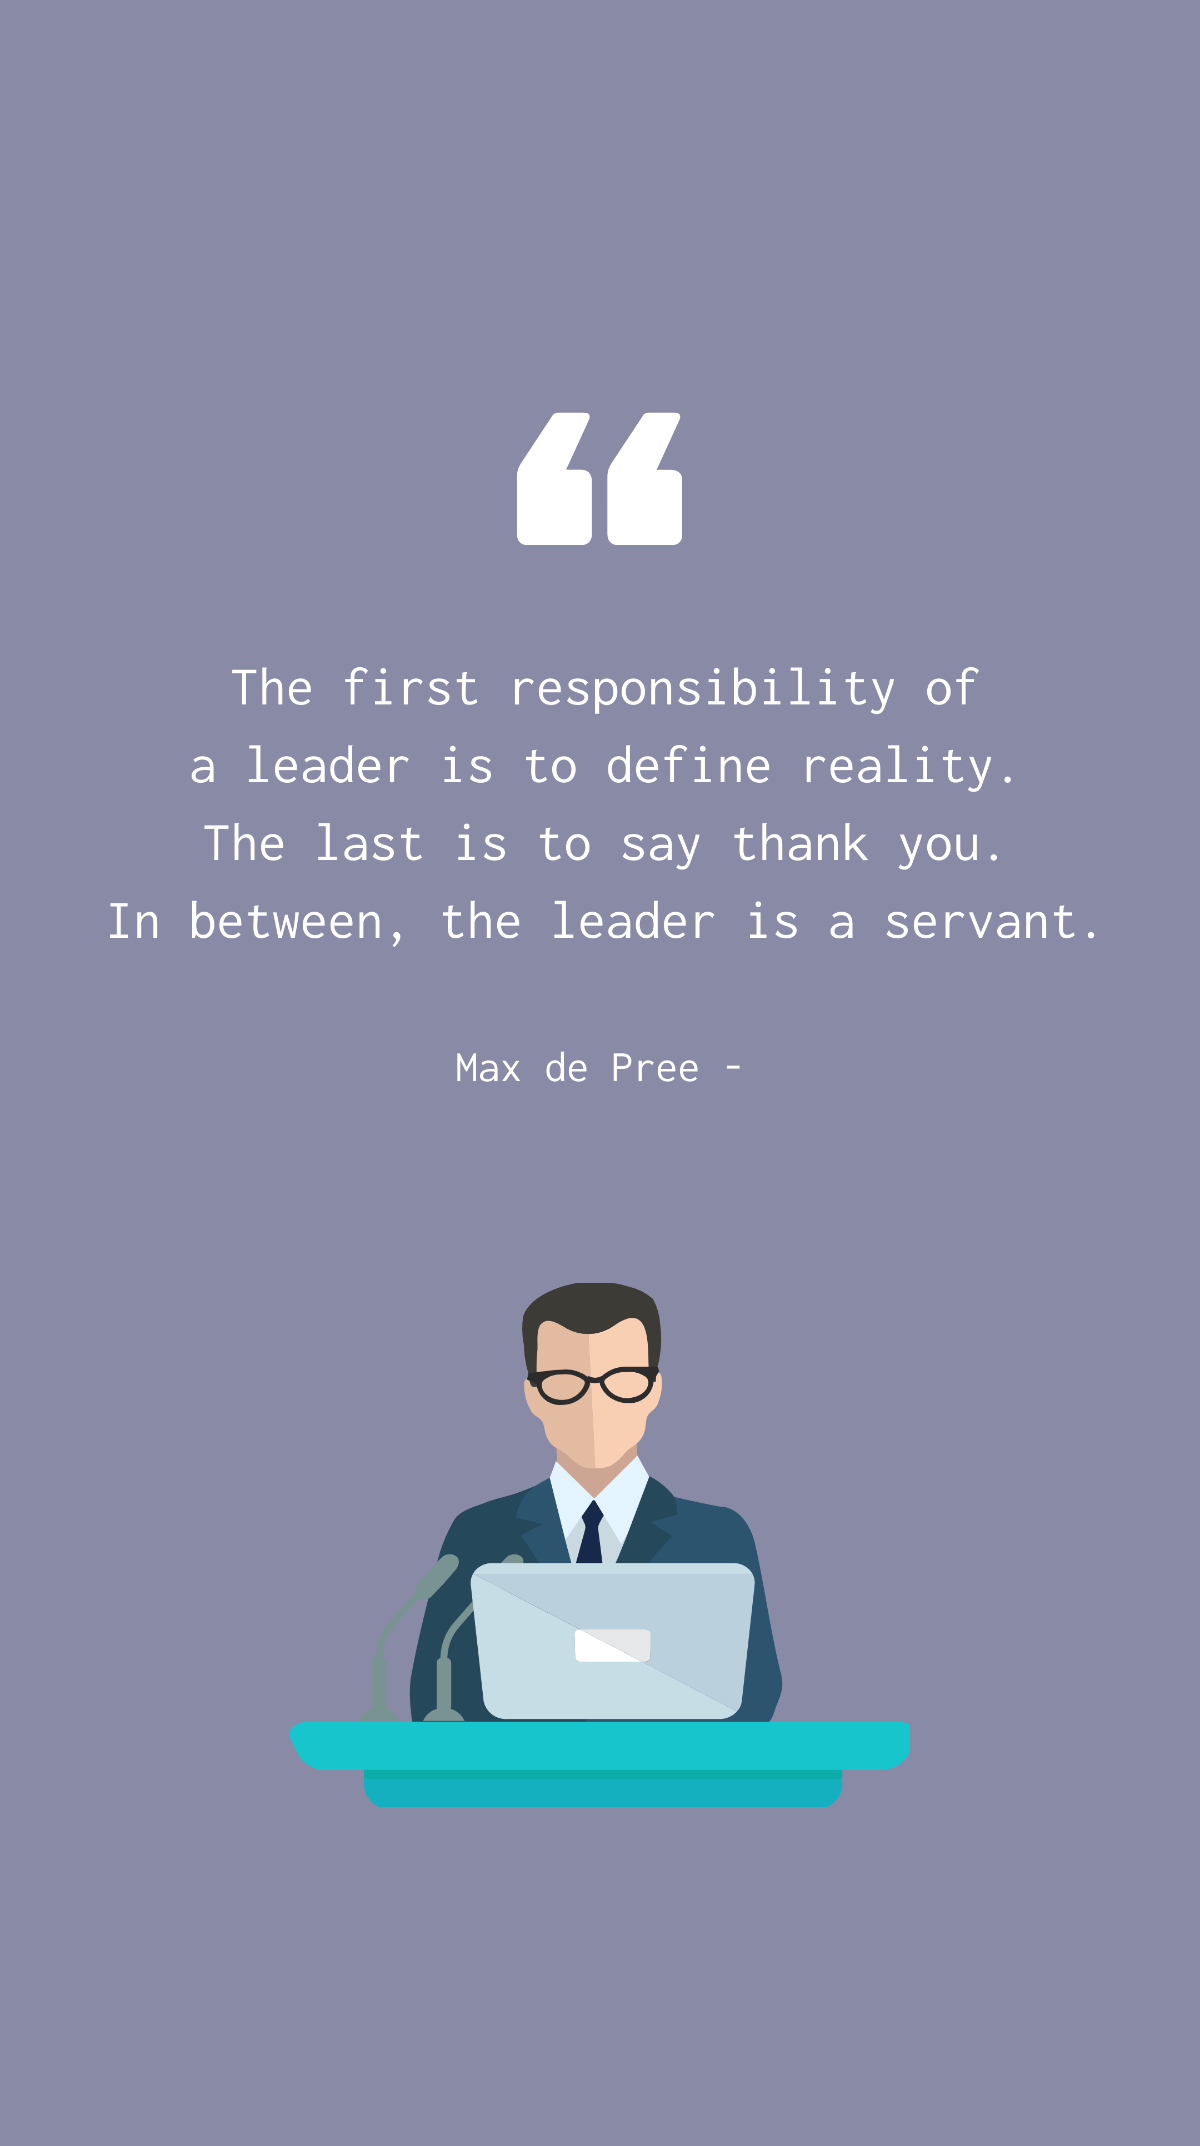 Free Max de Pree - The first responsibility of a leader is to define reality. The last is to say thank you. In between, the leader is a servant. Template